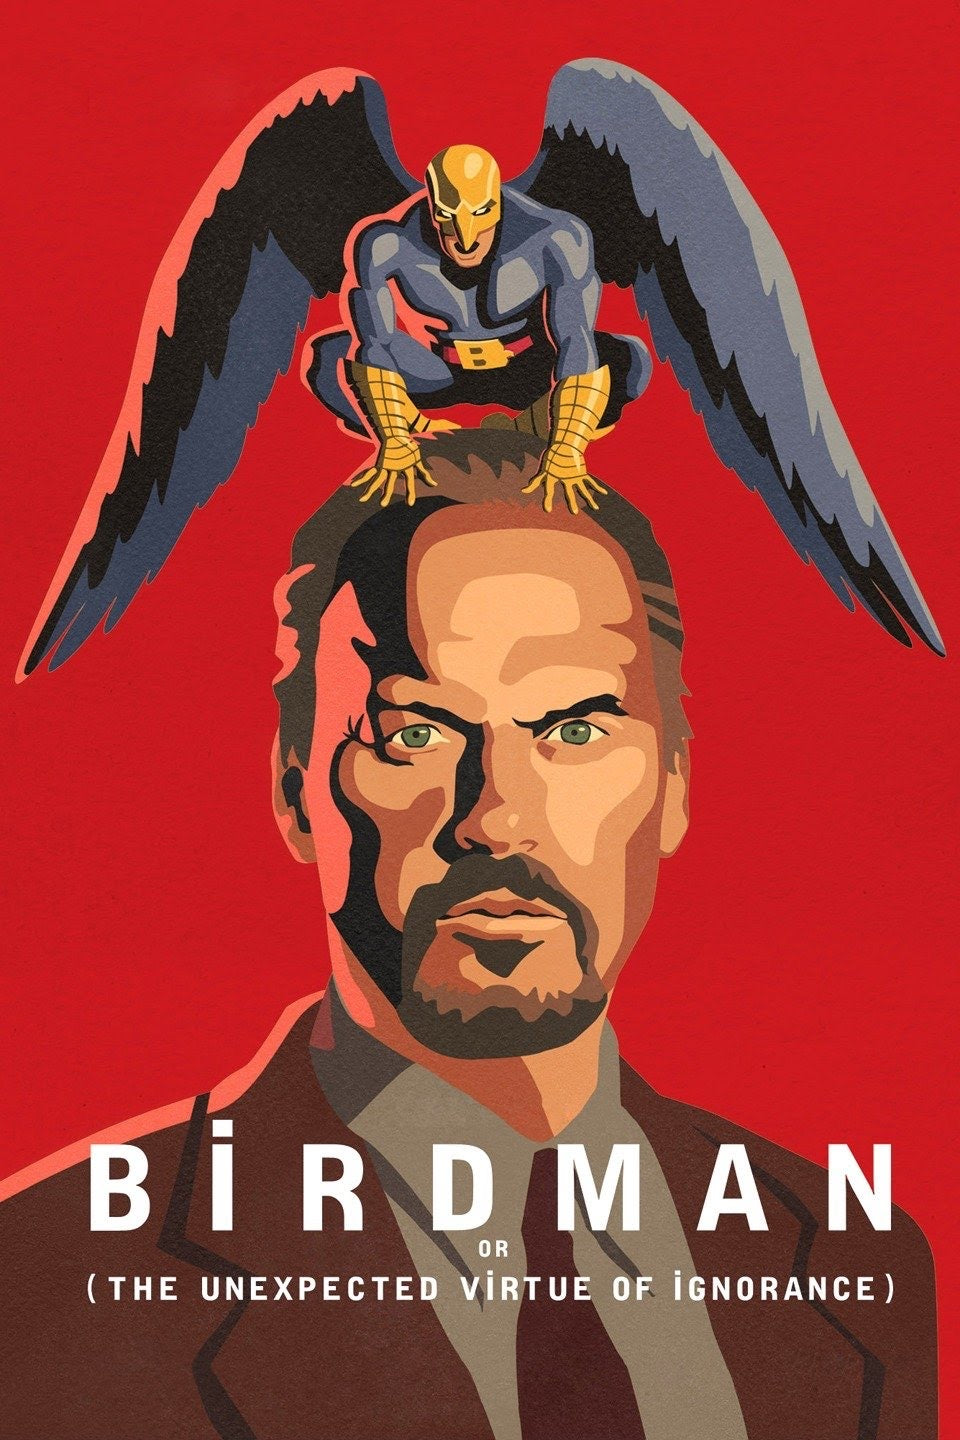 Birdman [or The Unexpected Virtue of Ignorance] (2014: Ports Via MA) iTunes HD or Vudu / Movies Anywhere HD code